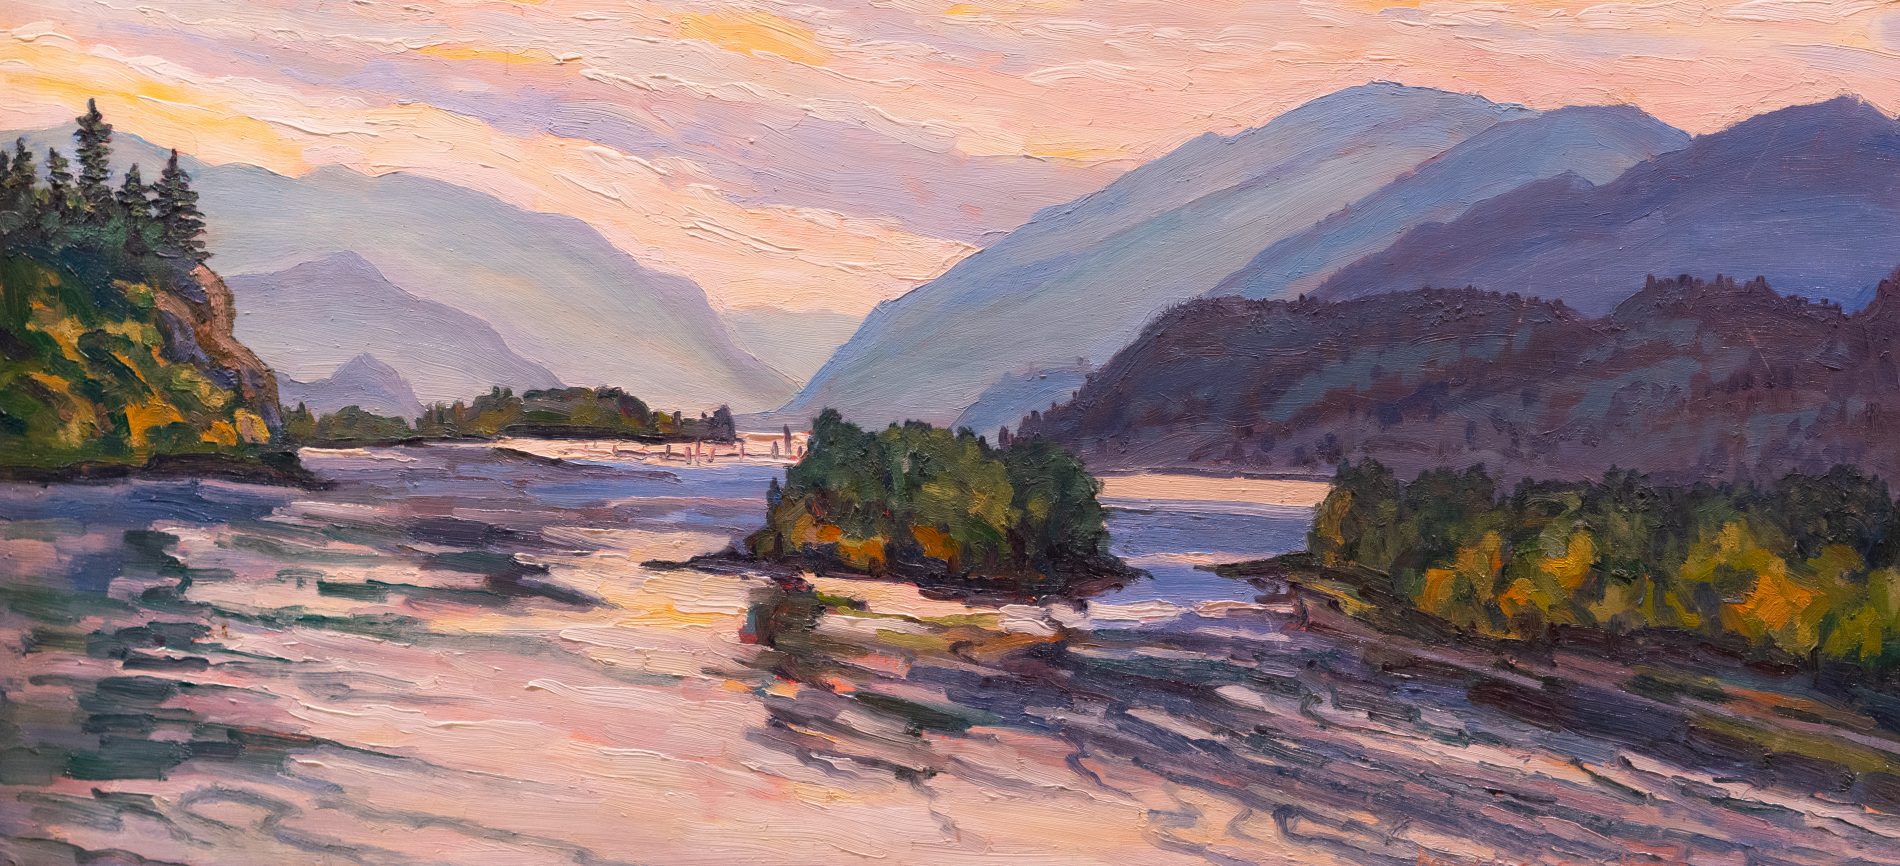 A painting of the Columbia River